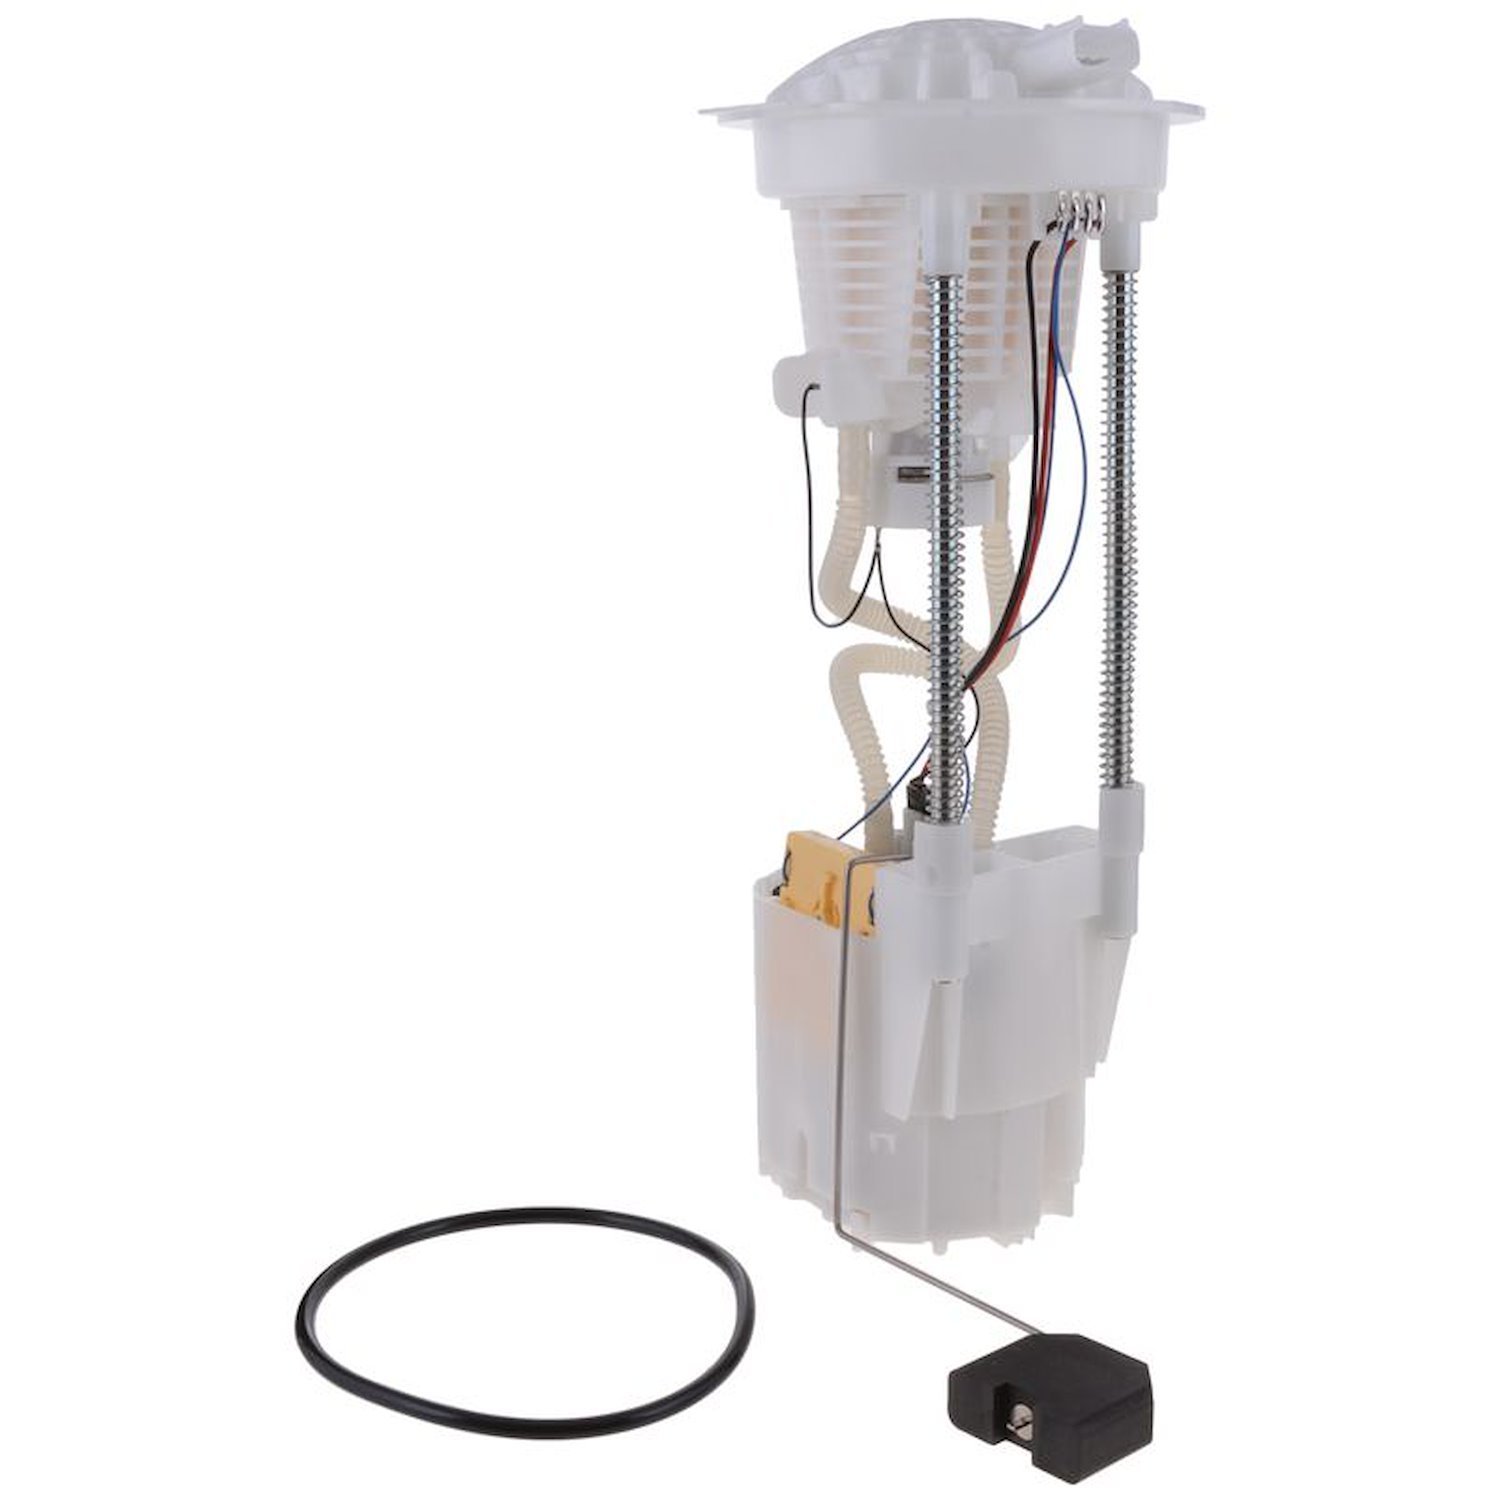 OE Chrysler/Dodge Replacement Fuel Pump Module Assembly for 2004-2006 Dodge Ram 1500/2005-2007 Dodge Ram 2500/3500